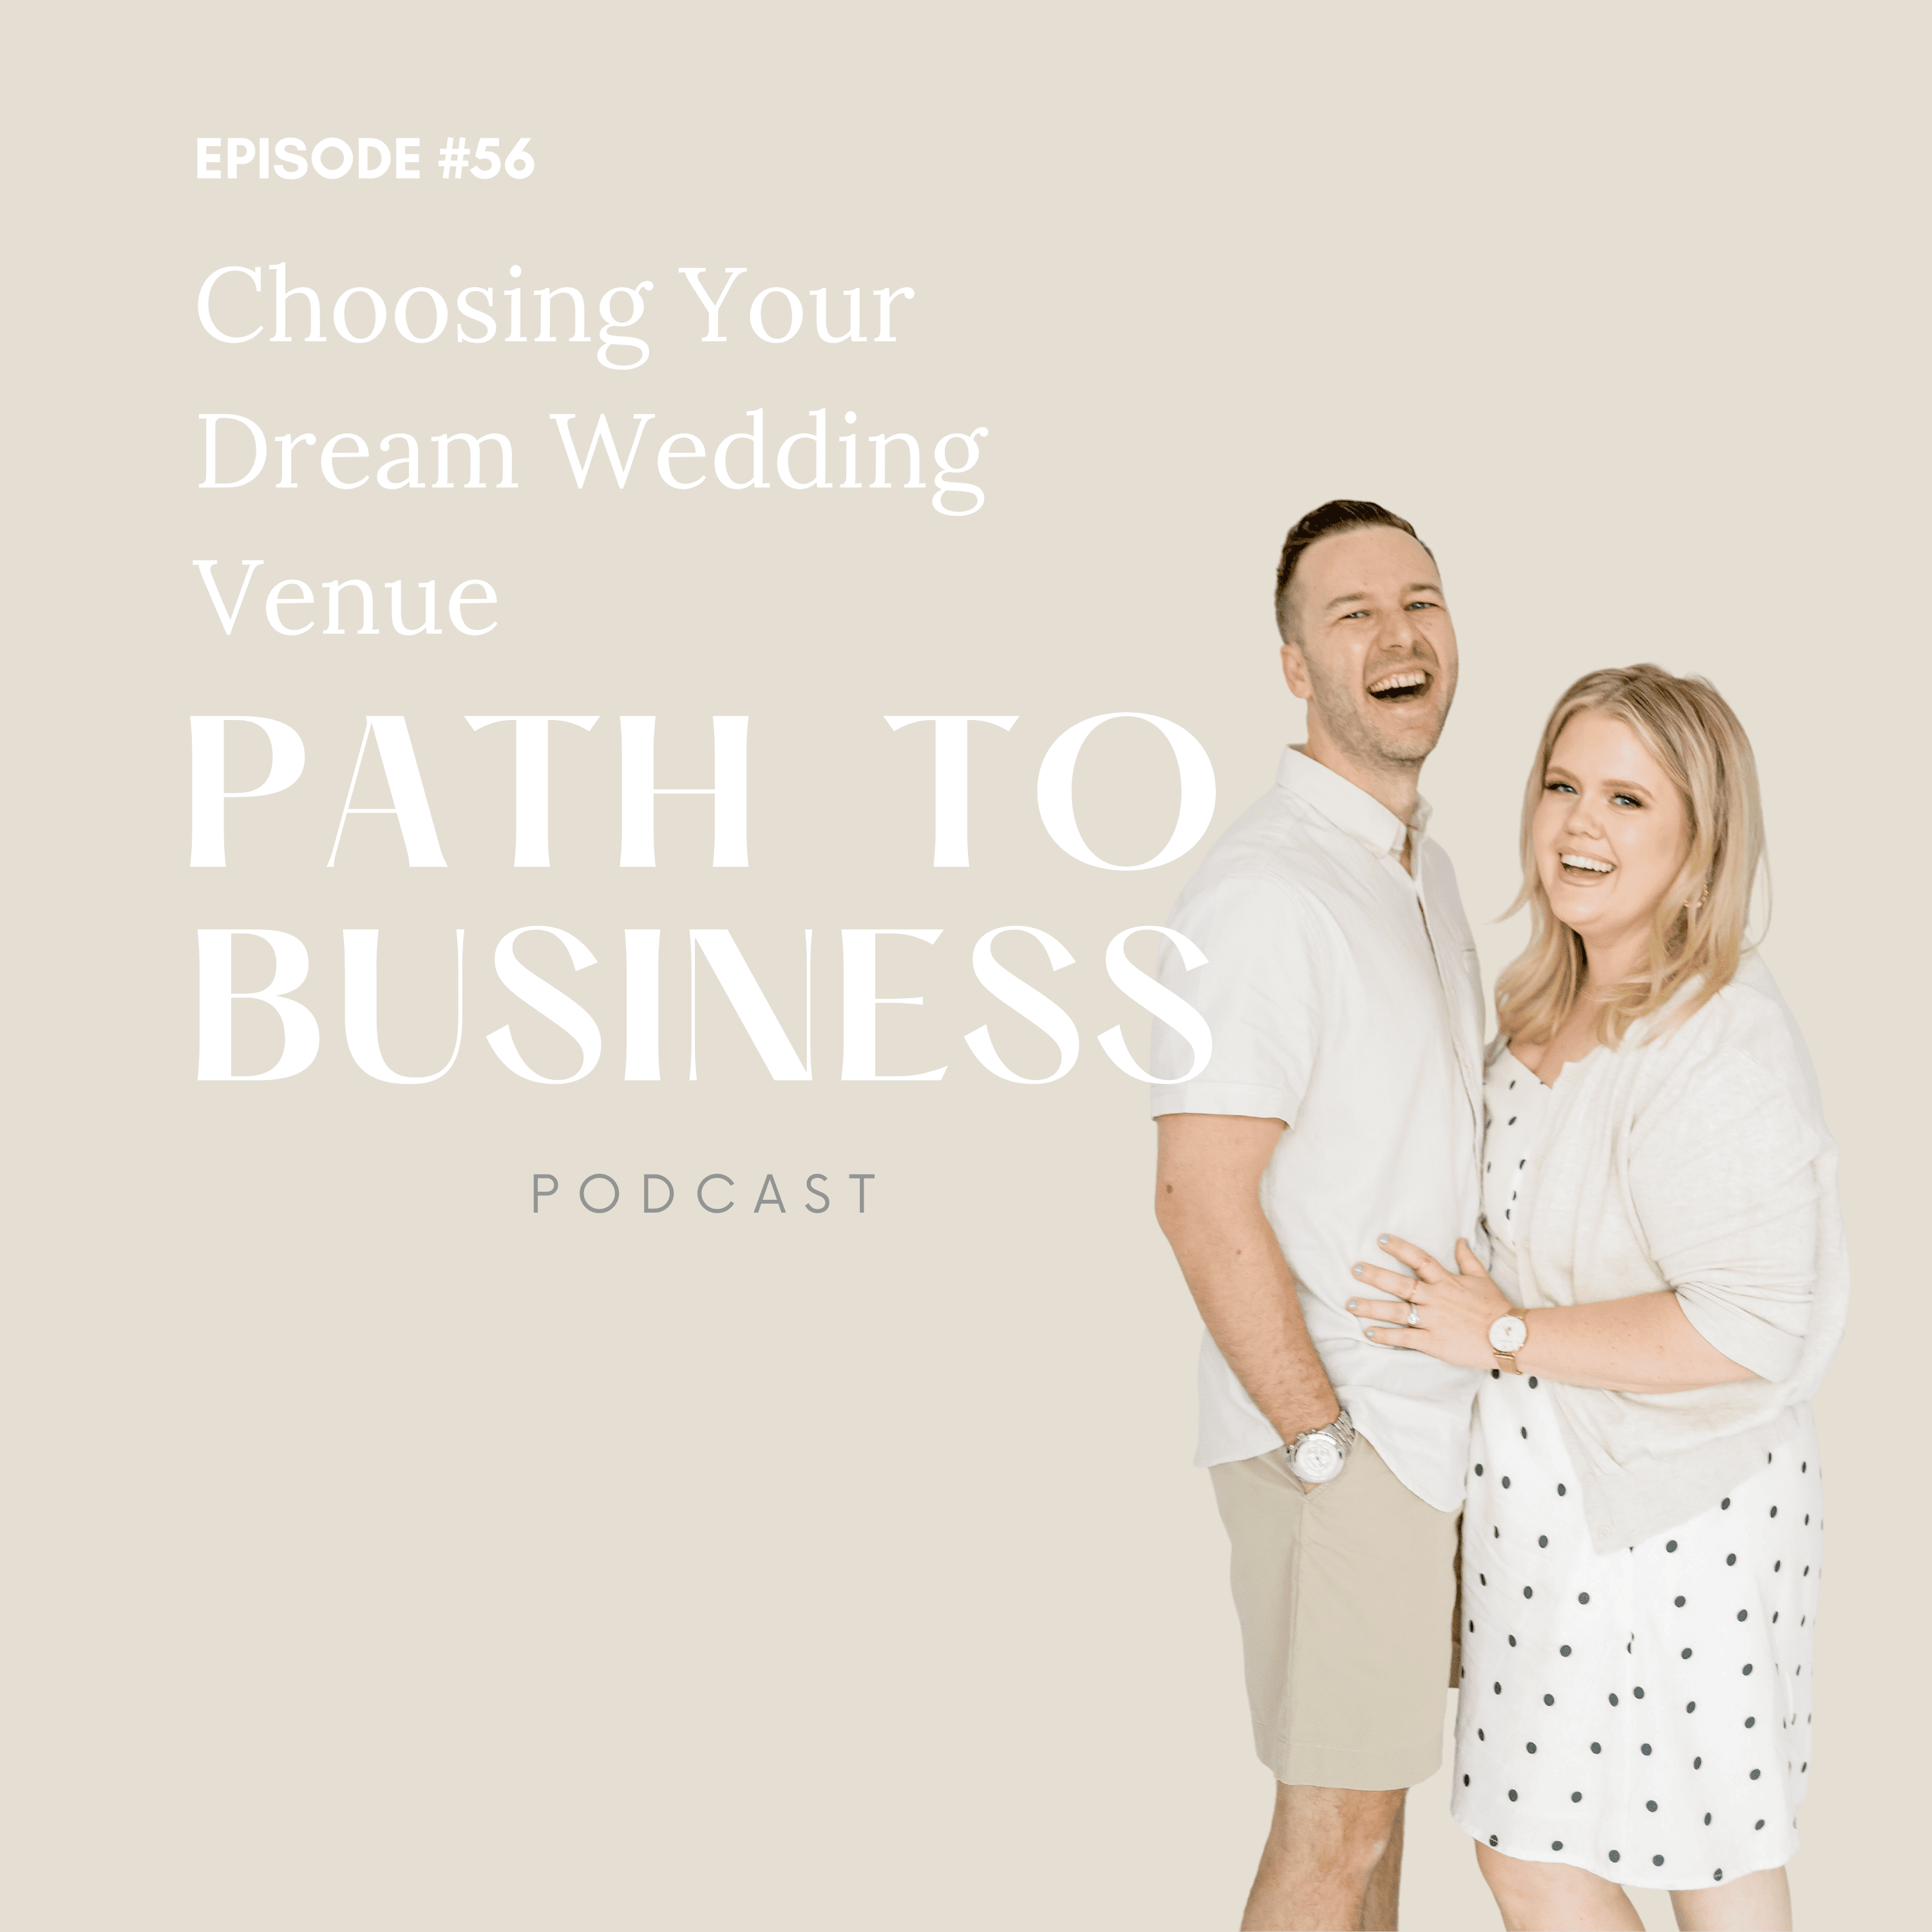 path to business podcast - Choosing your dream wedding venue